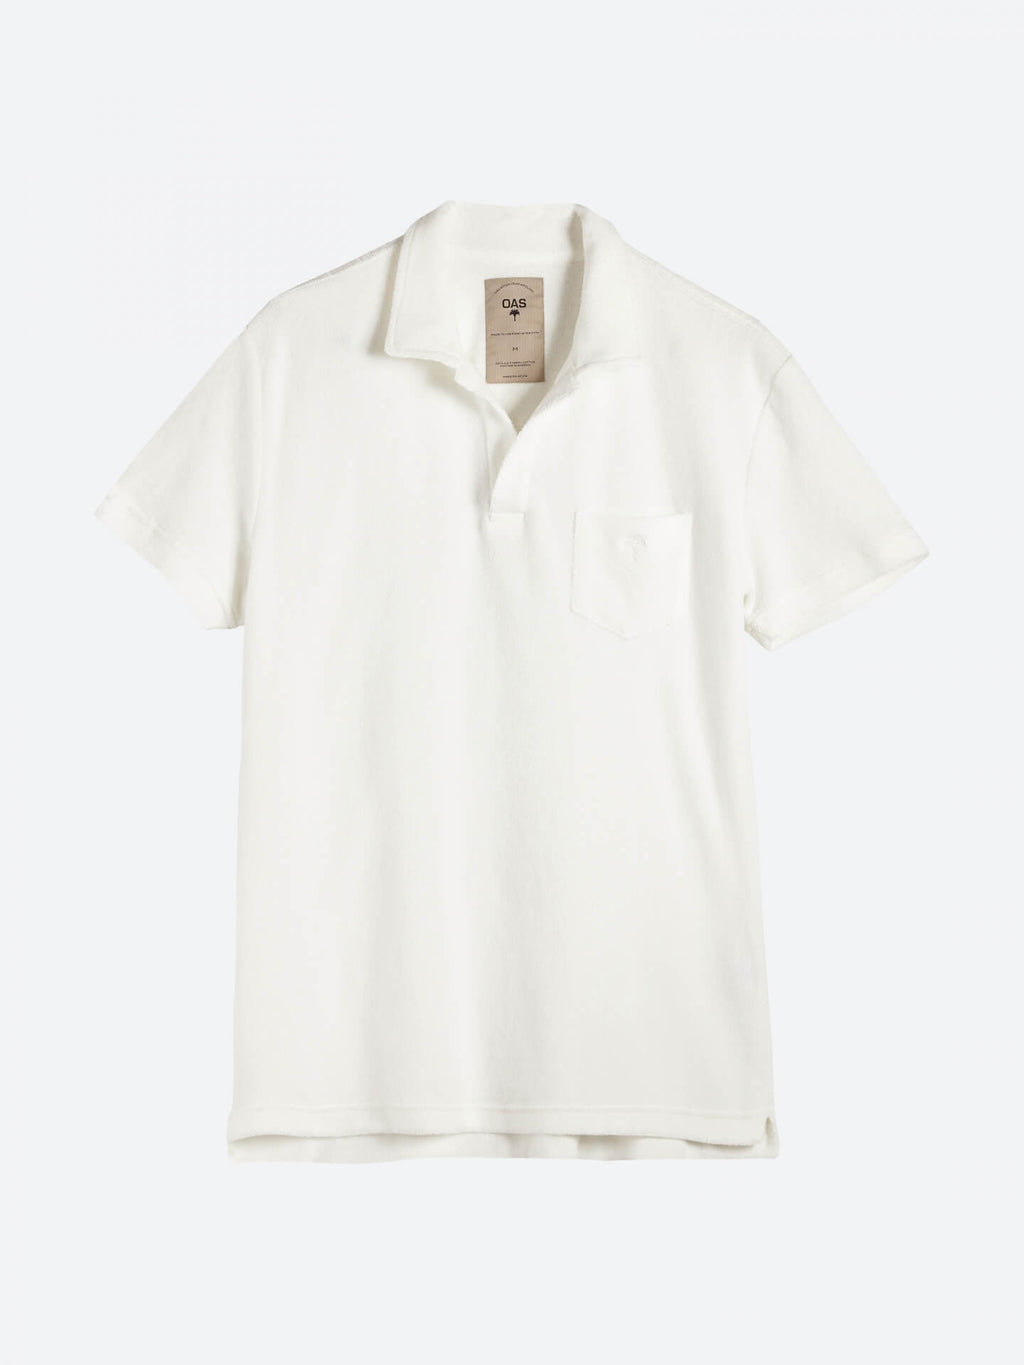 Oas Solid White Terry Shirt - Mojo Independent Store